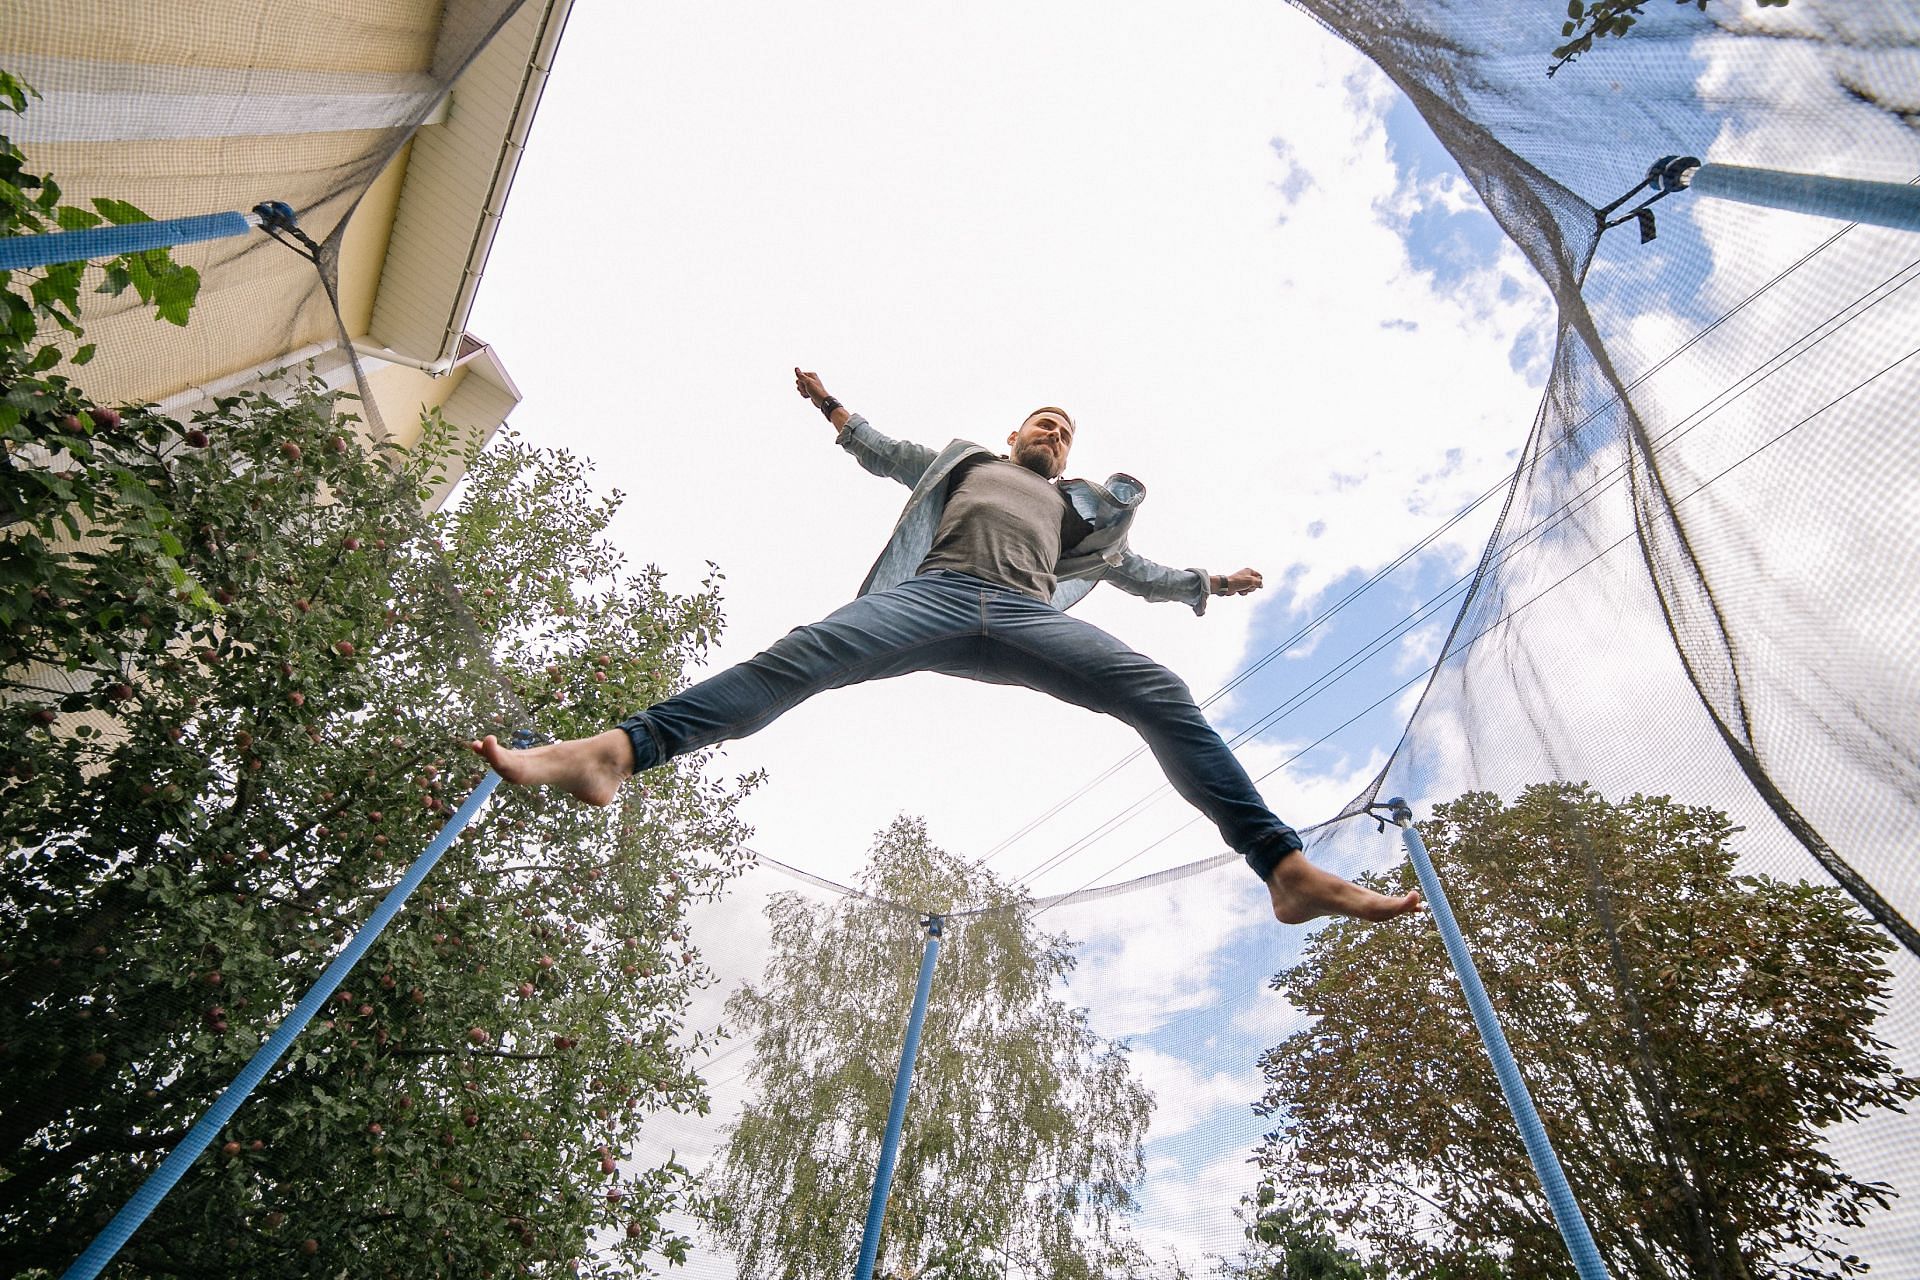 Trampoline exercises can be a fun diversion from your typical workout regimen. (Image via Pexels/ Yan Krukov)